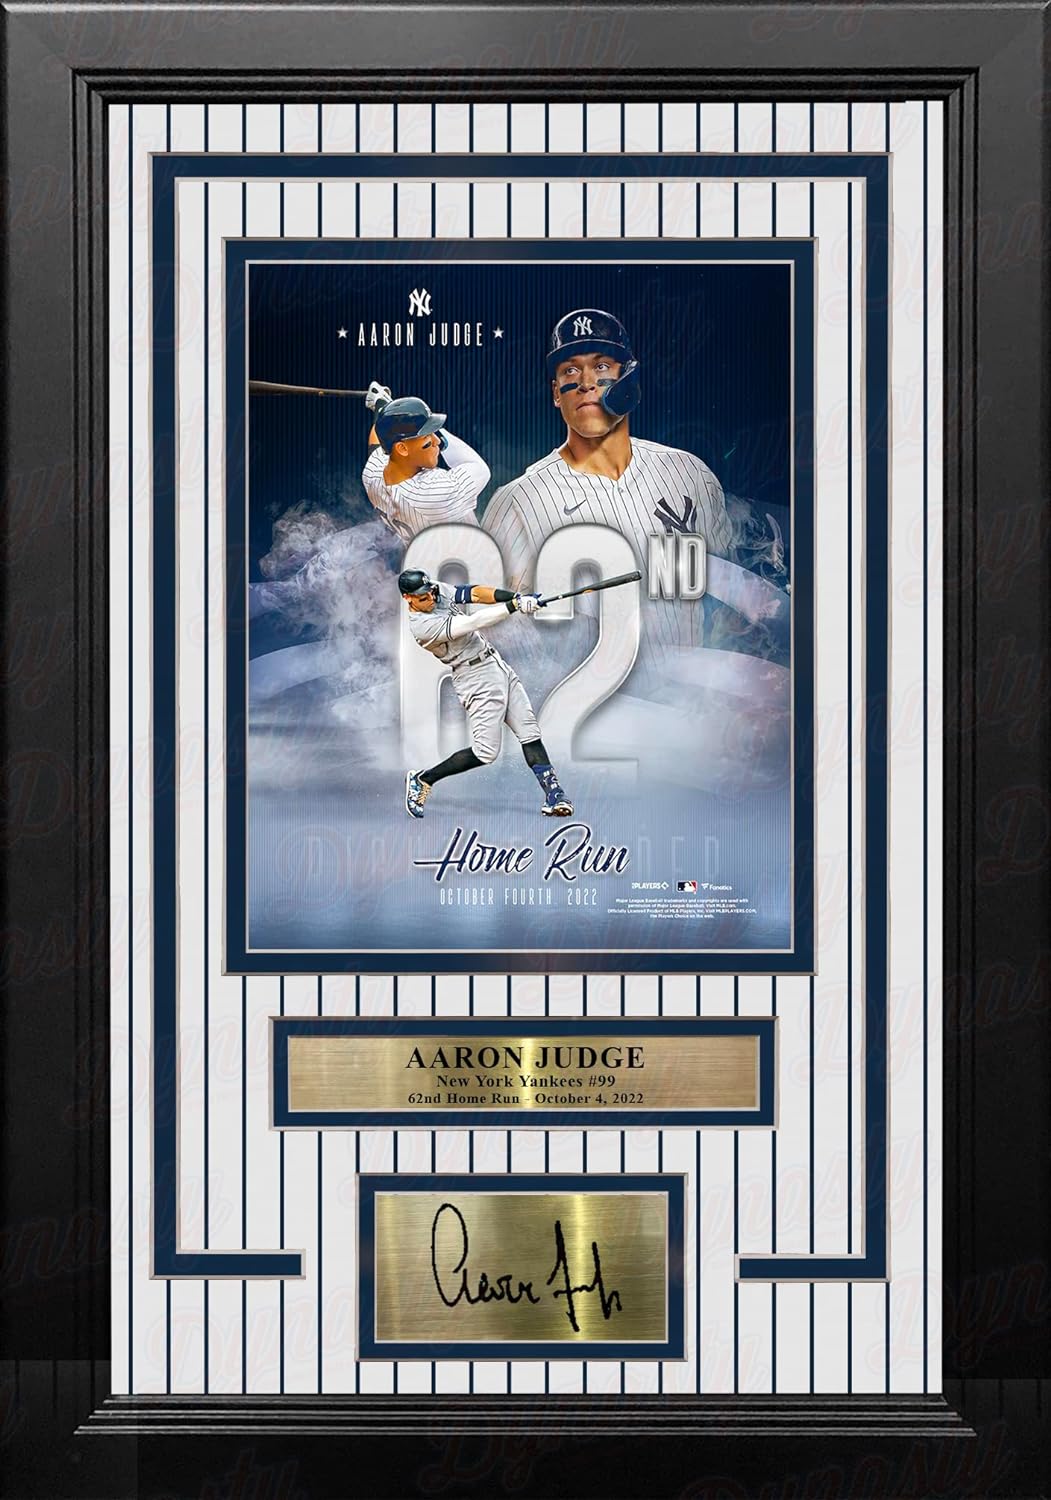 Aaron Judge AL Record 62nd Home Run New York Yankees 8x10 Framed Photo with Engraved Autograph